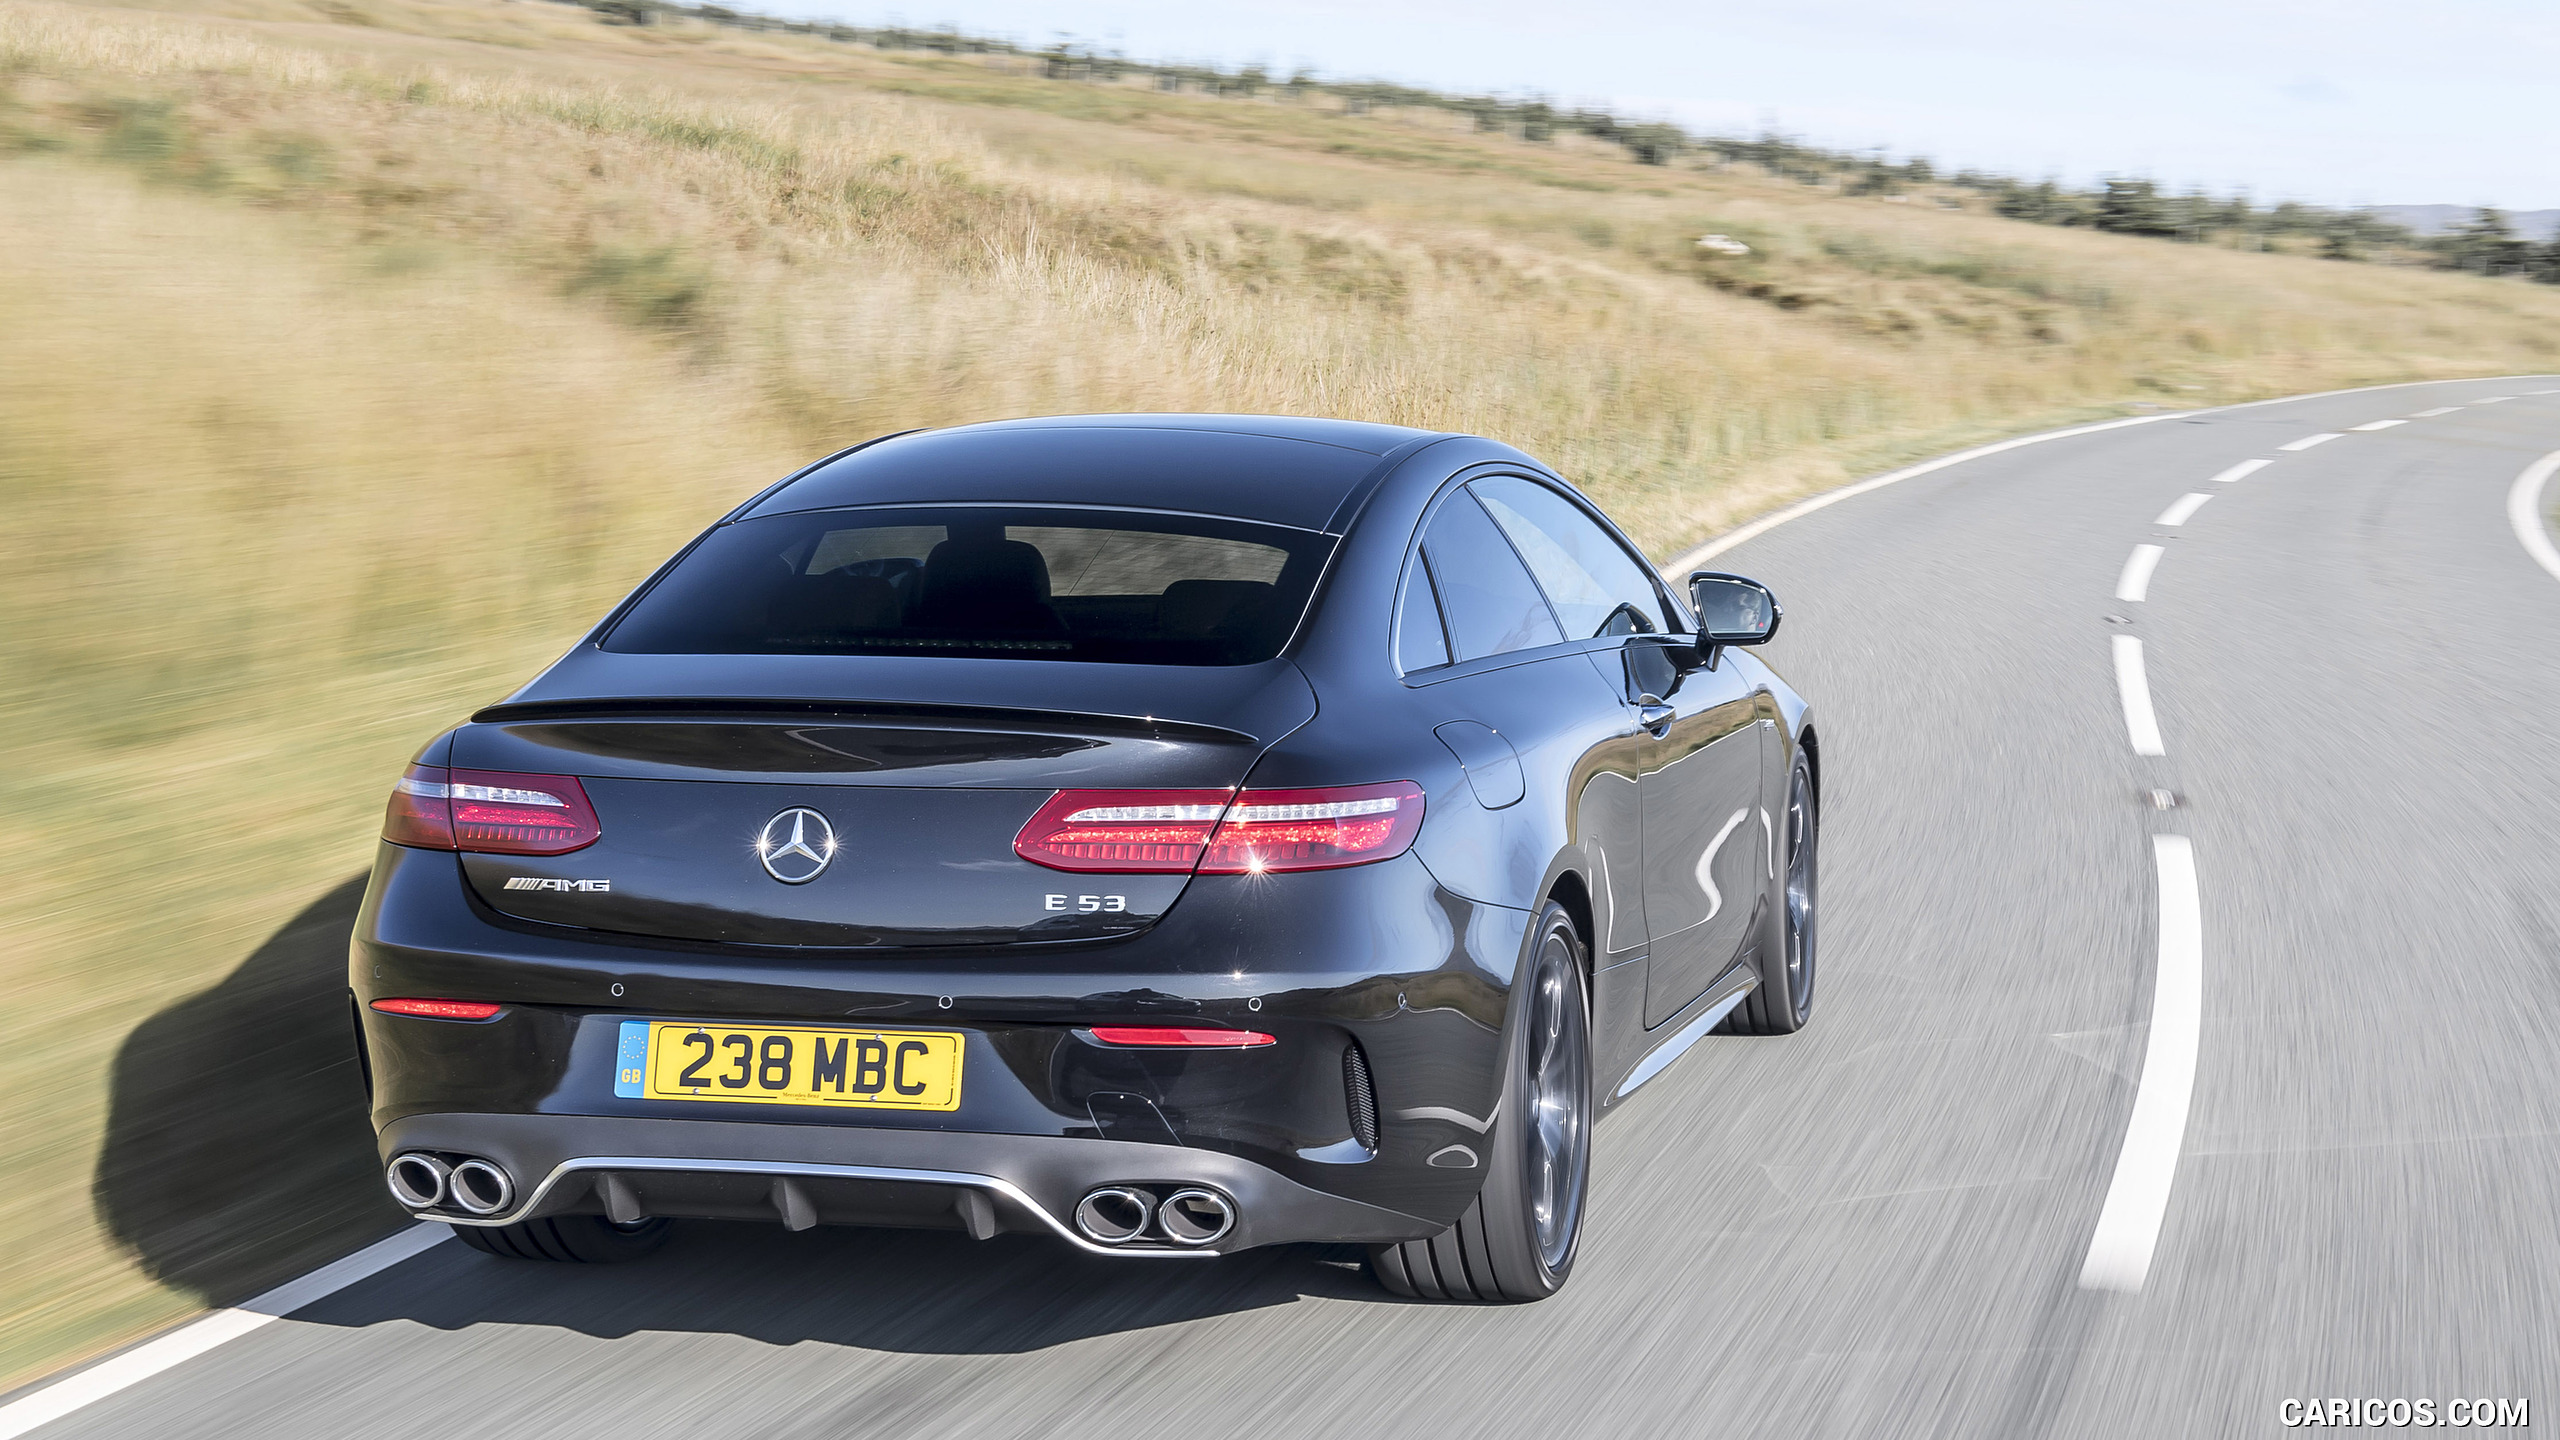 2019 Mercedes-AMG E 53 Coupe (UK-Spec) - Rear, #7 of 166